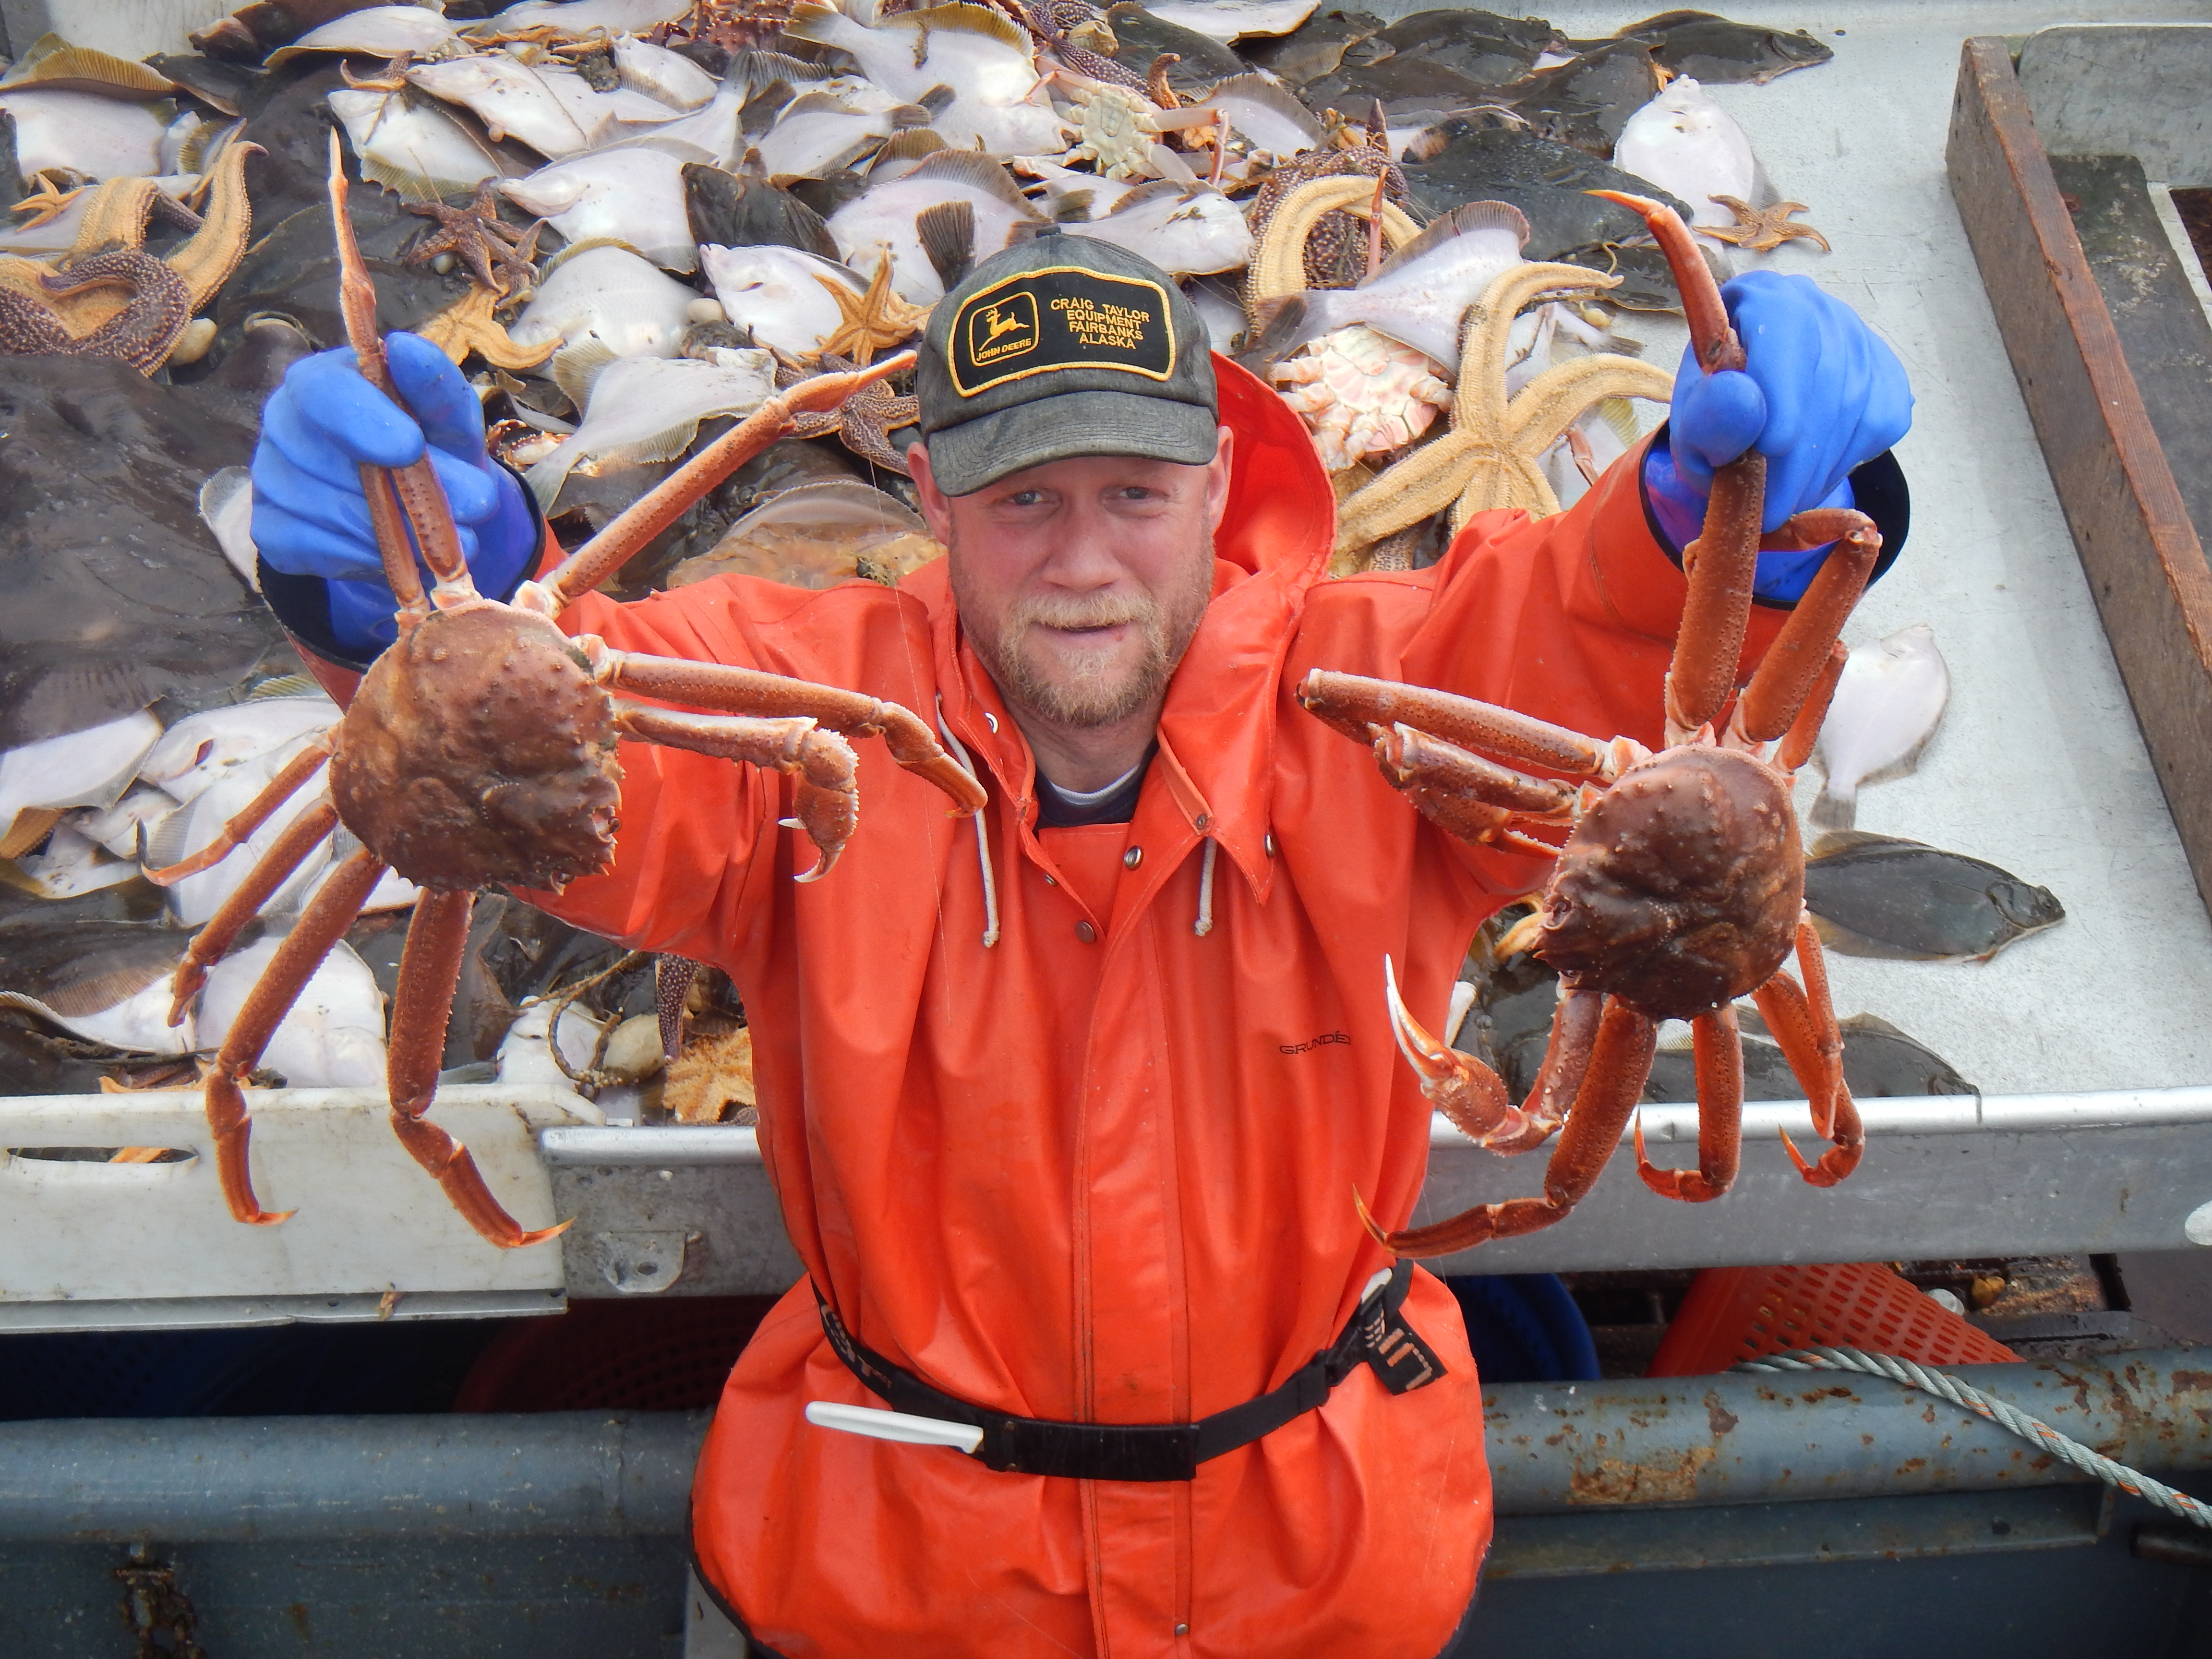 Bob Foy, director of the NOAA lab in Kodiak, holds up king crab, a species expected to be impacted by ocean acidification. (Photo courtesy NOAA’s Fisheries Science Center)